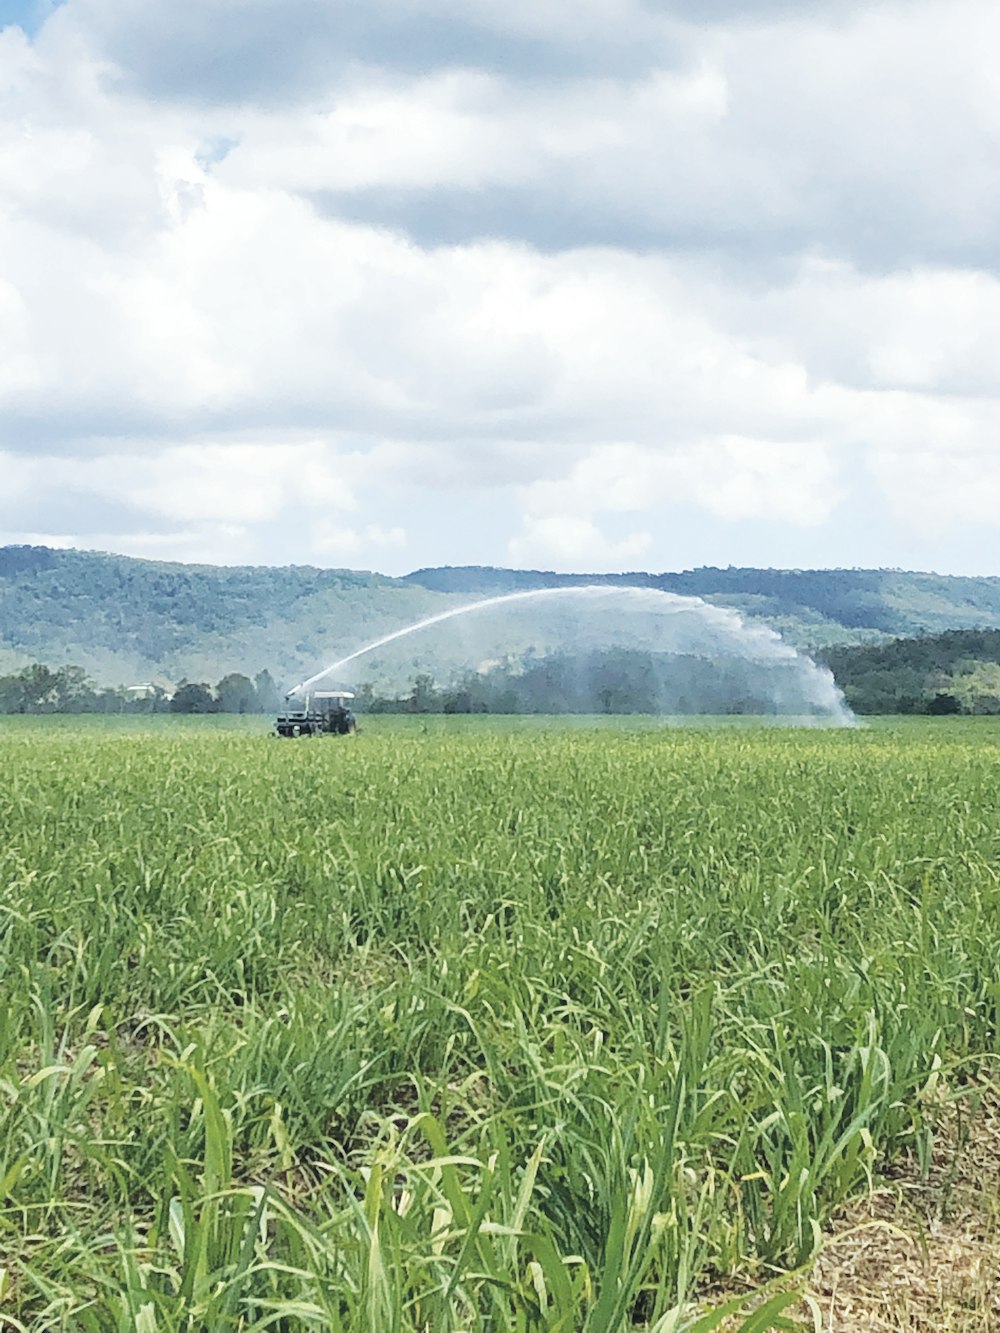 a tractor spraying water on a field of crops